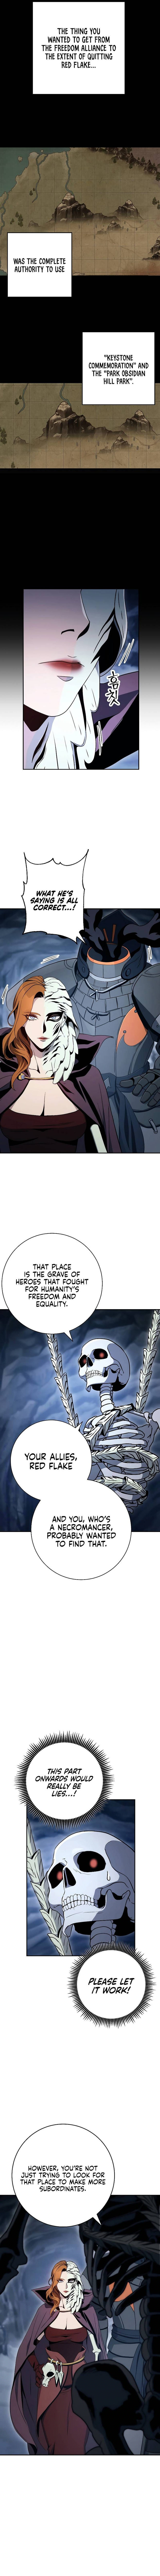 Skeleton Soldier (Skeleton Soldier Couldn’t Protect the Dungeon) Chapter 204 page 2 - MangaWeebs.in